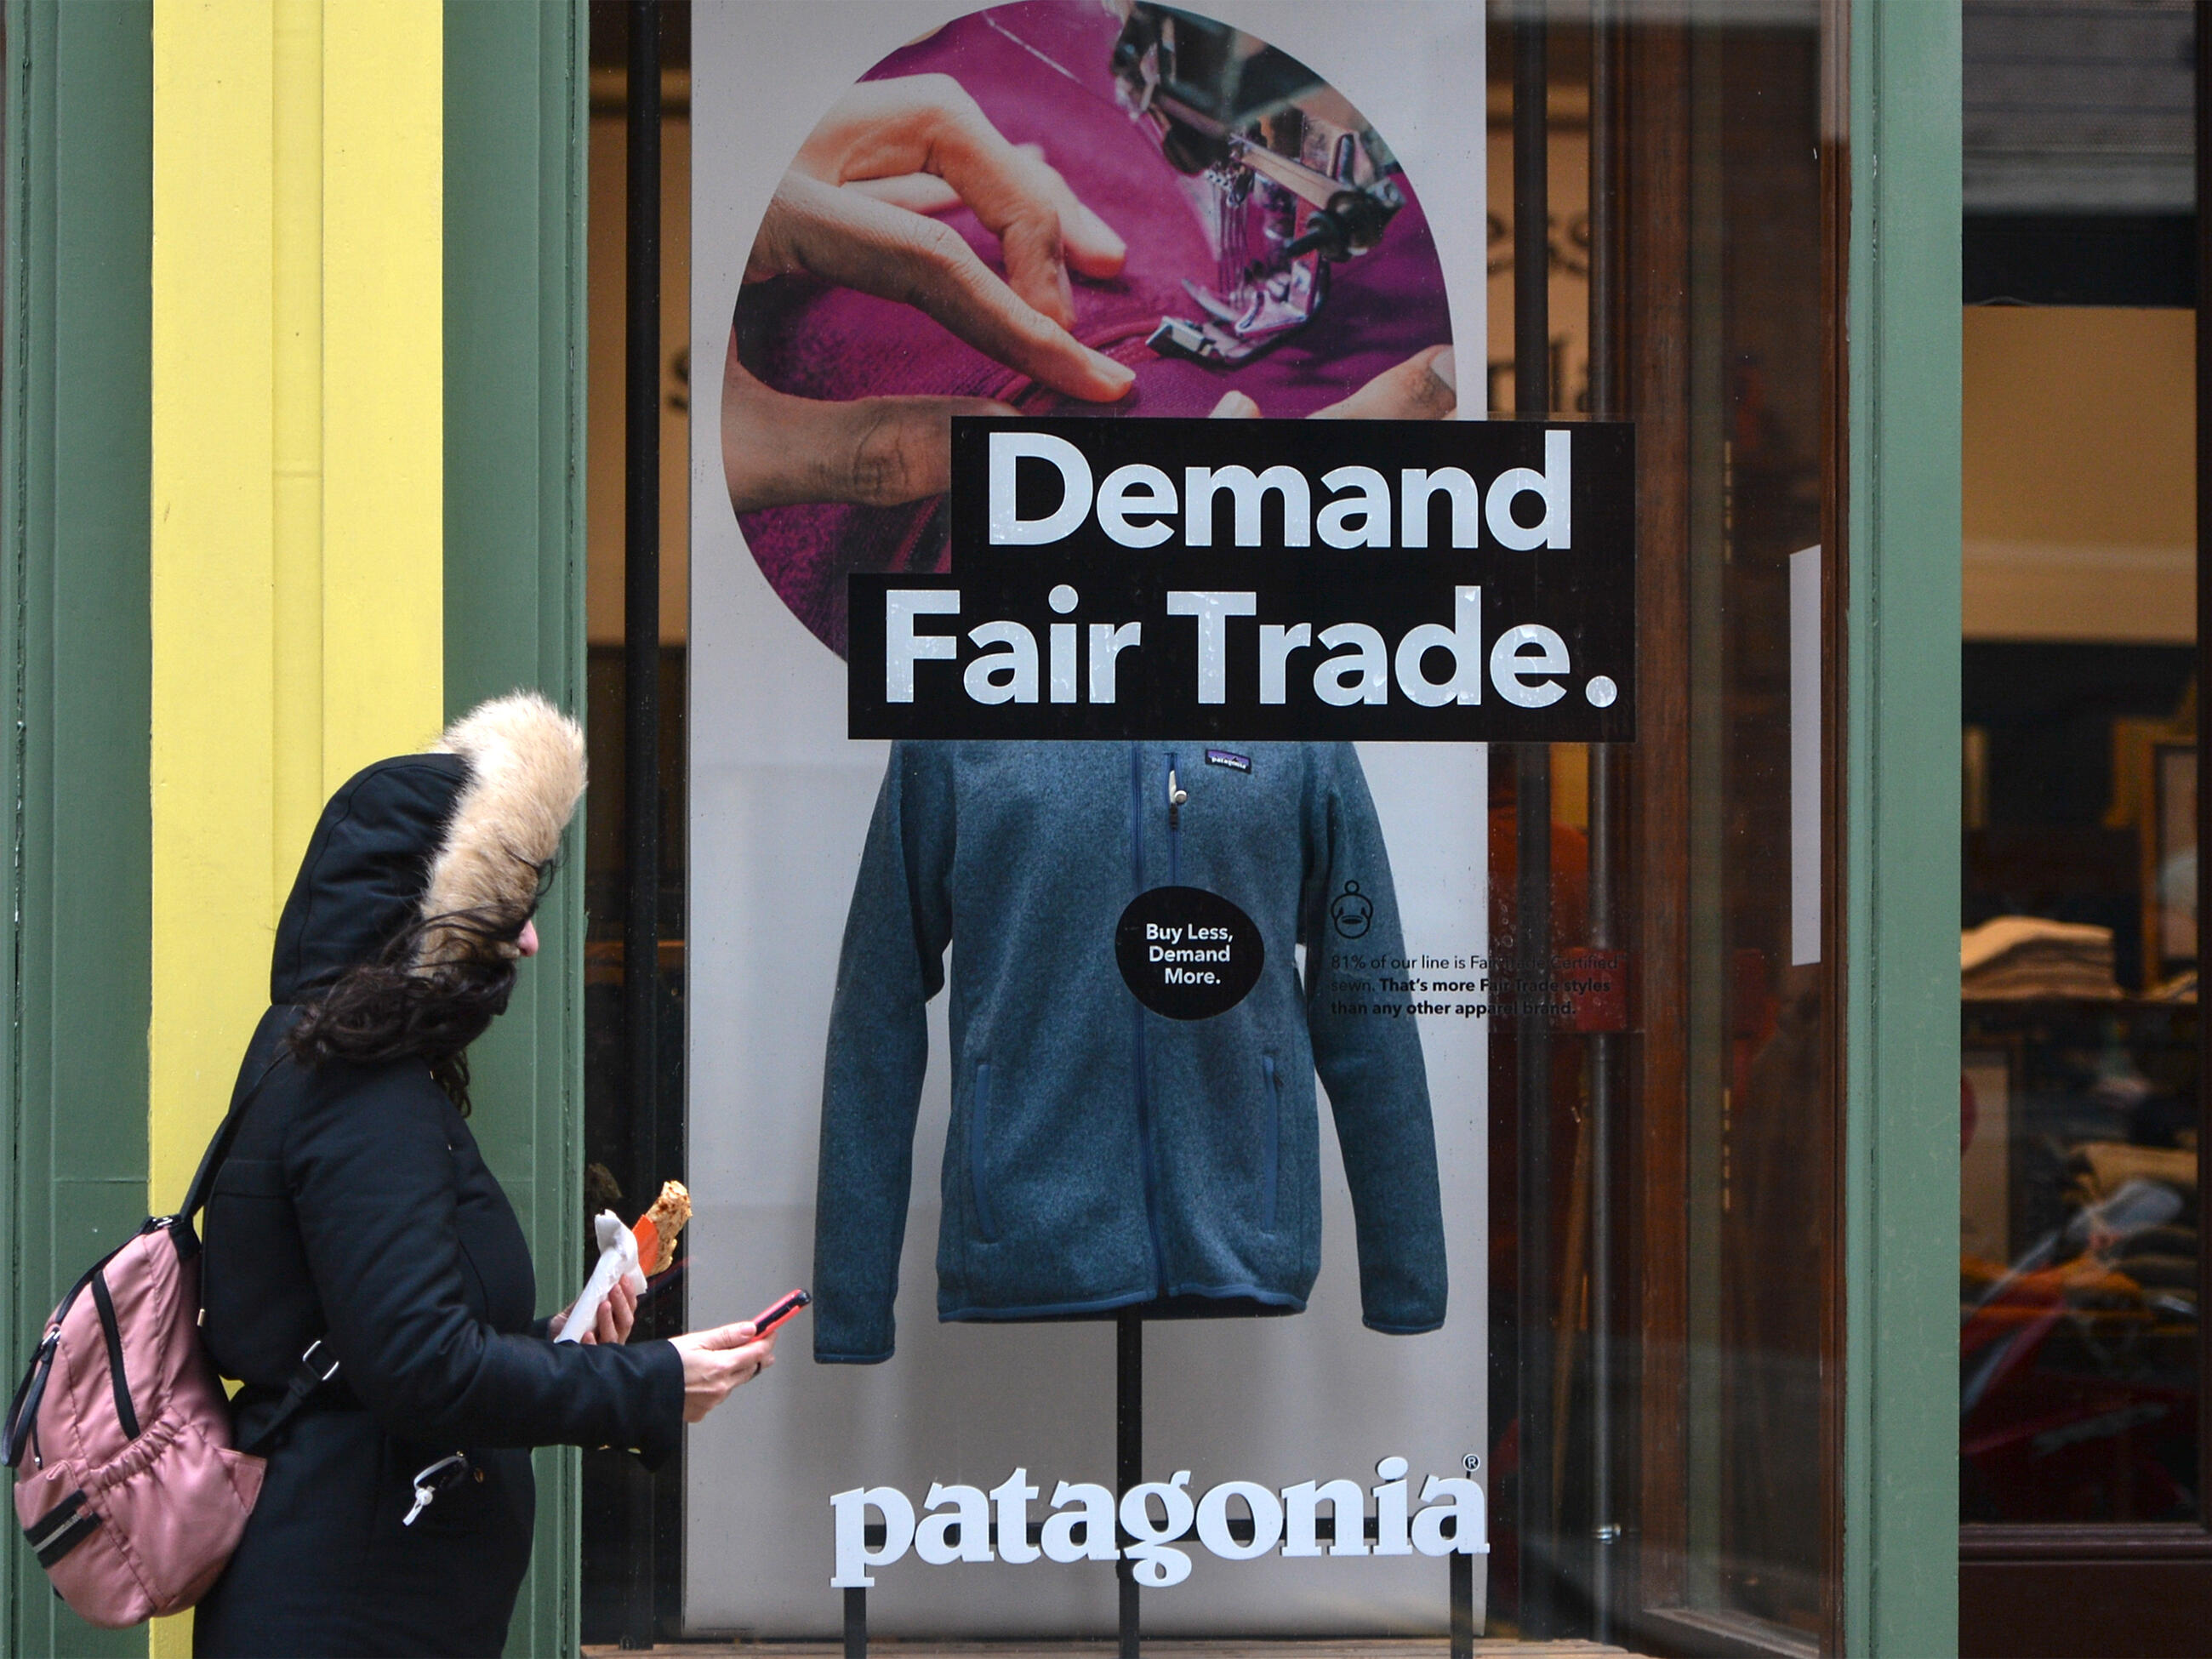 How Patagonia Learned to Act on Its Values